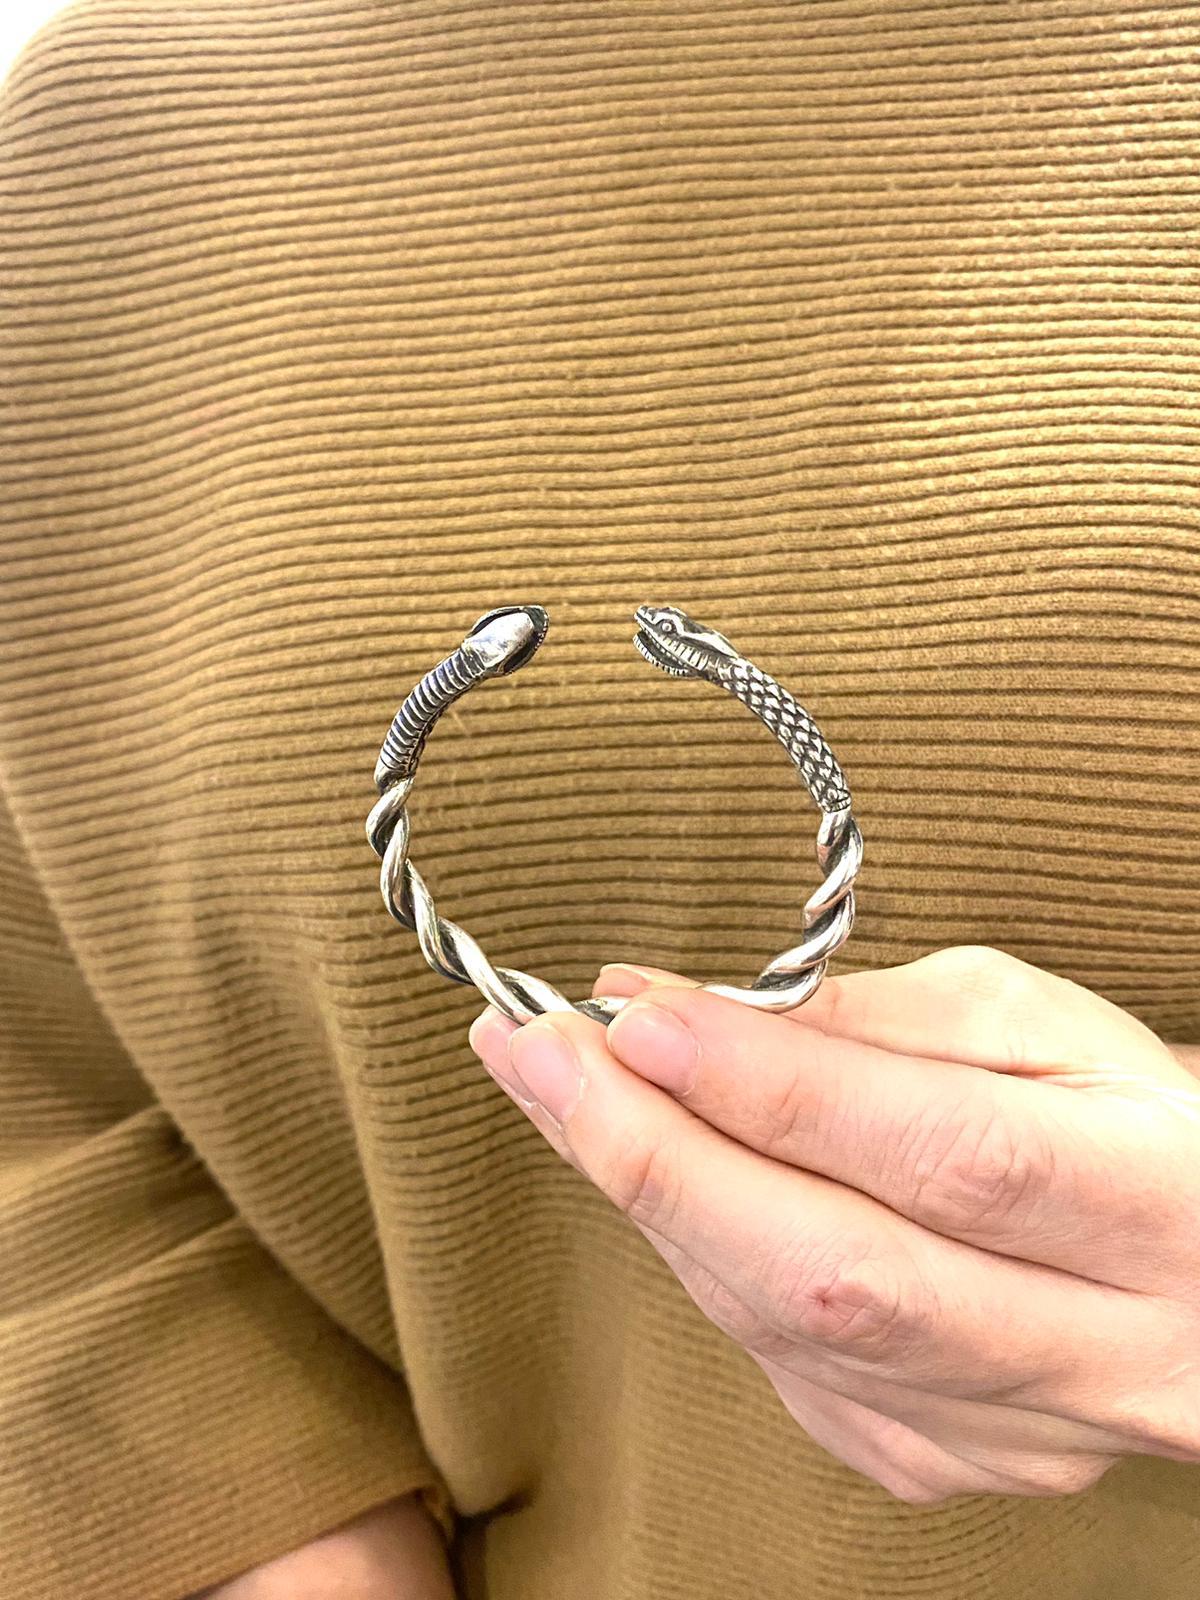 French Etruscan Revival Snakes Bracelet Cuff in Solid .925 Sterling Silver For Sale 1